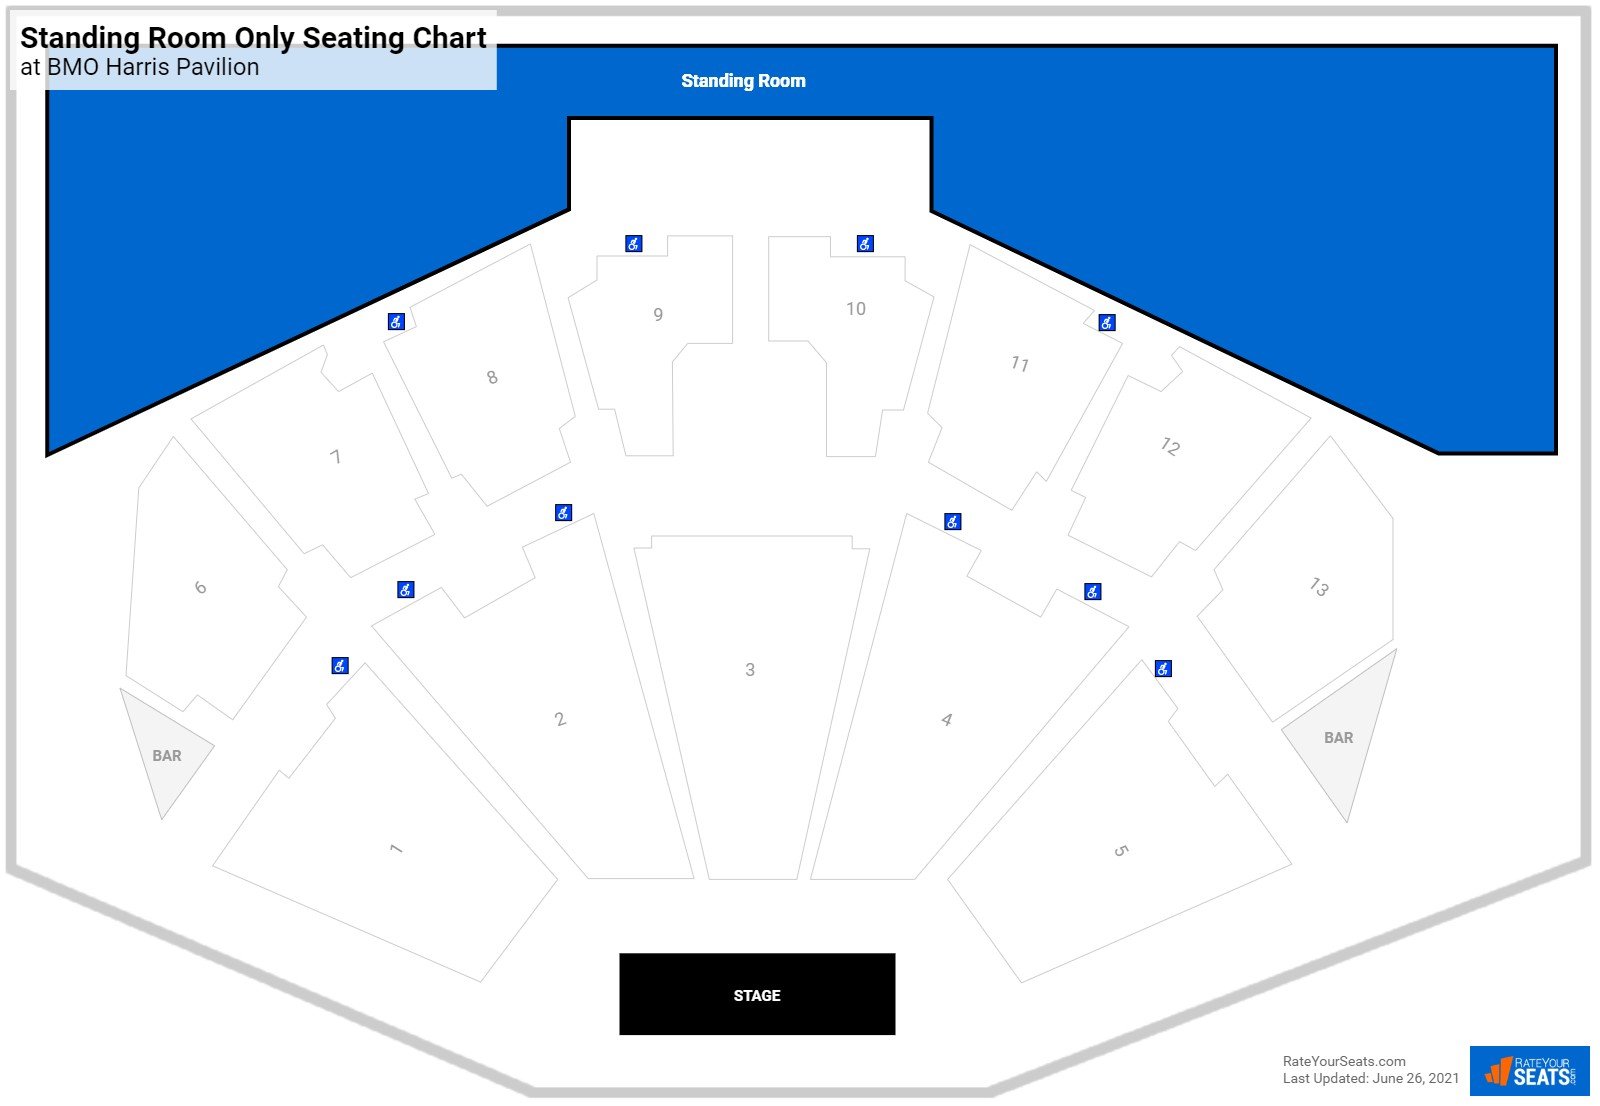 Concert Standing Room Only Seating Chart at BMO Harris Pavilion